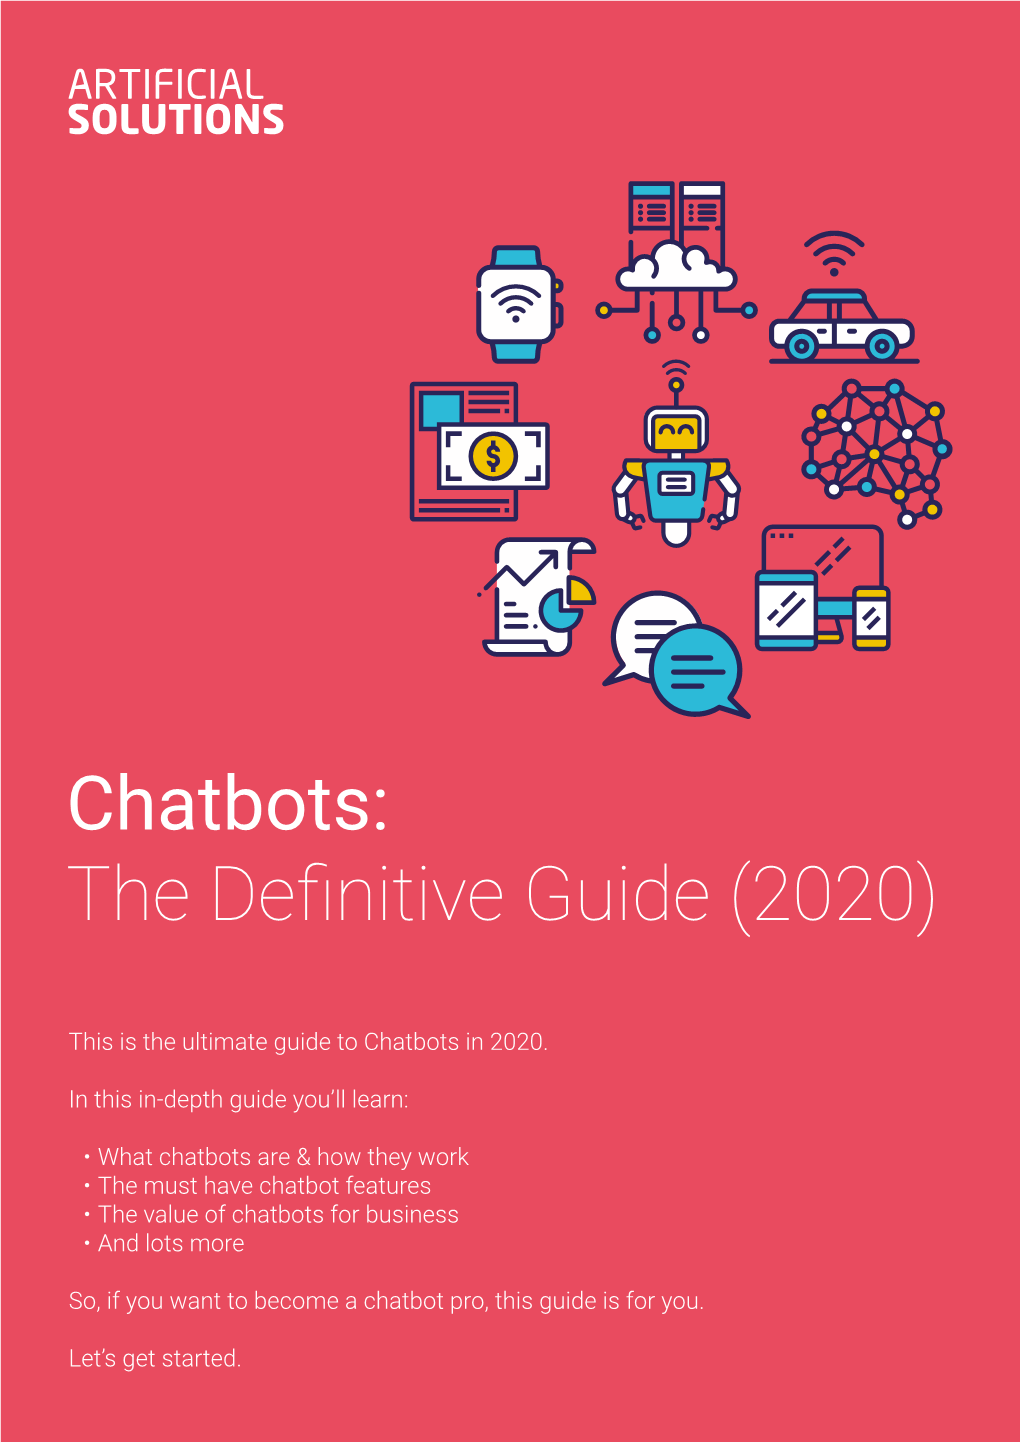 Chatbots: the Definitive Guide (2020)